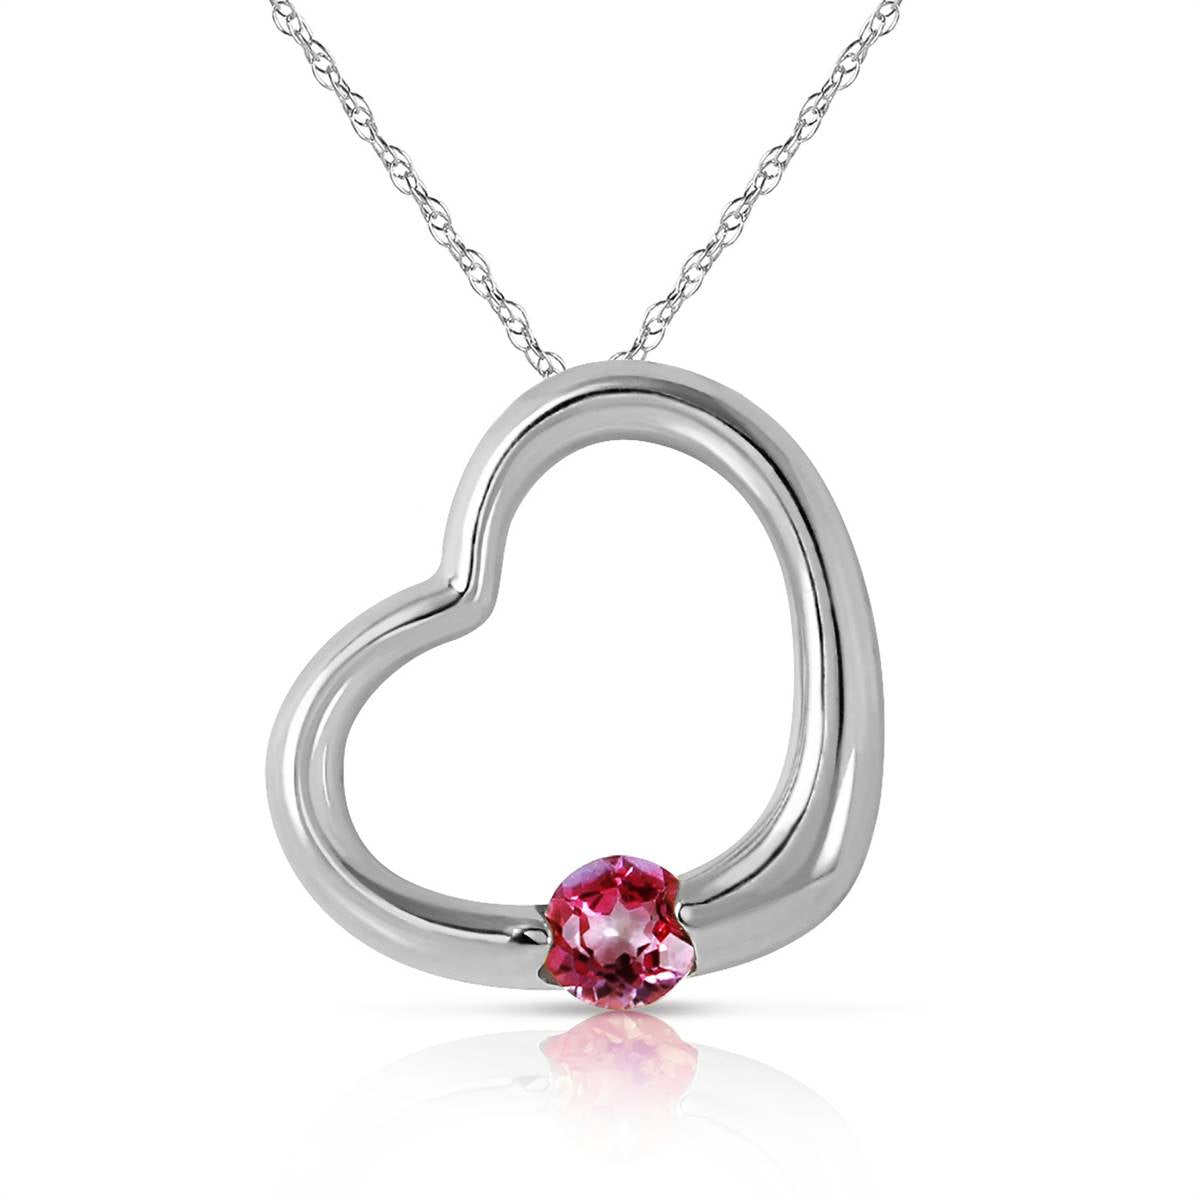 14K Solid White Gold Heart Necklace w/ Natural Pink Topaz